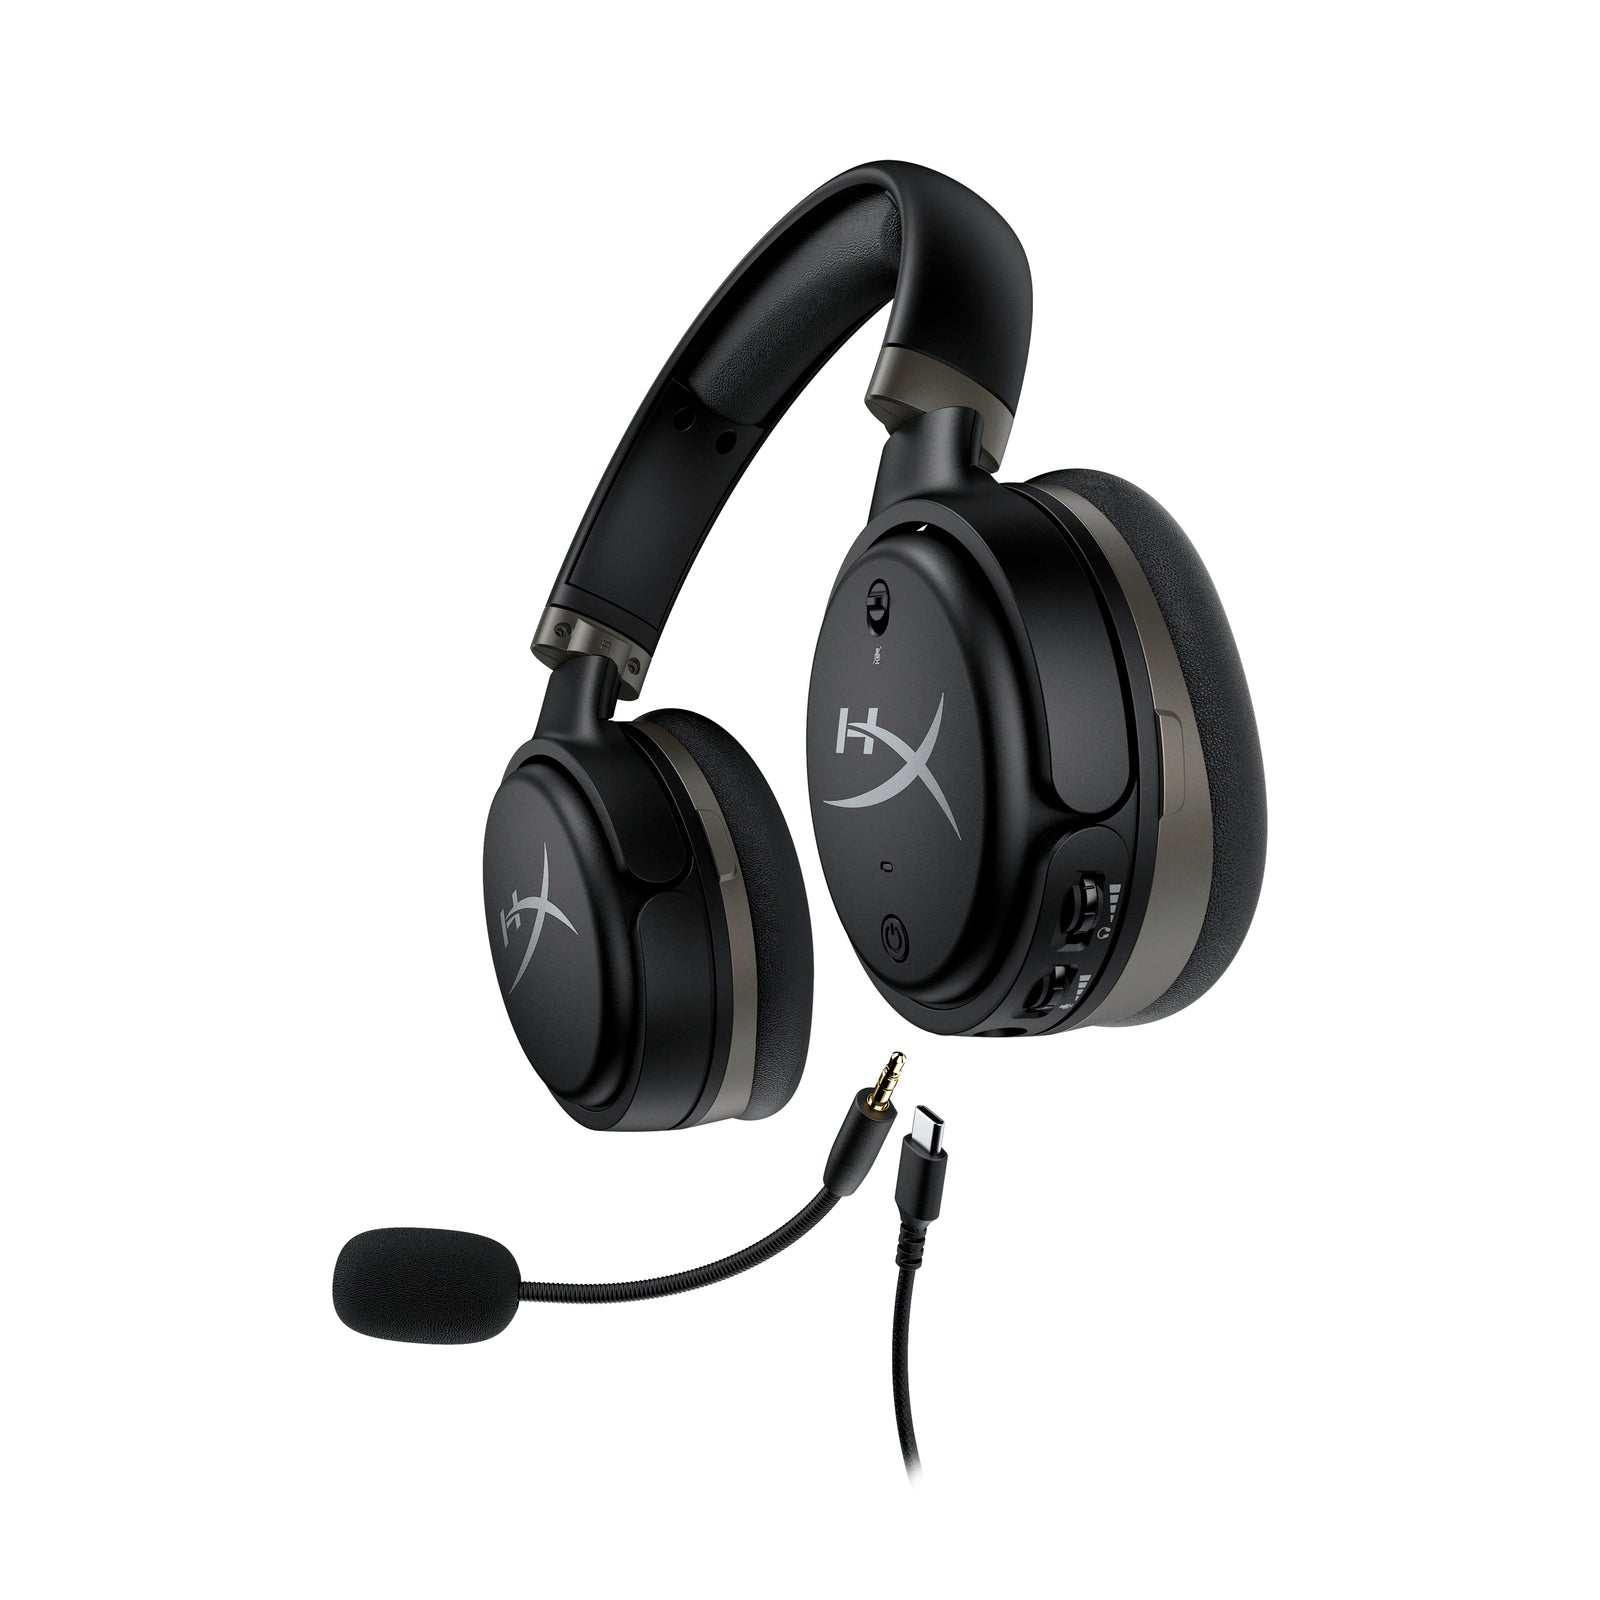 Cloud Orbit S Gaming Headset with 3D Audio & Head Tracking| HyperX